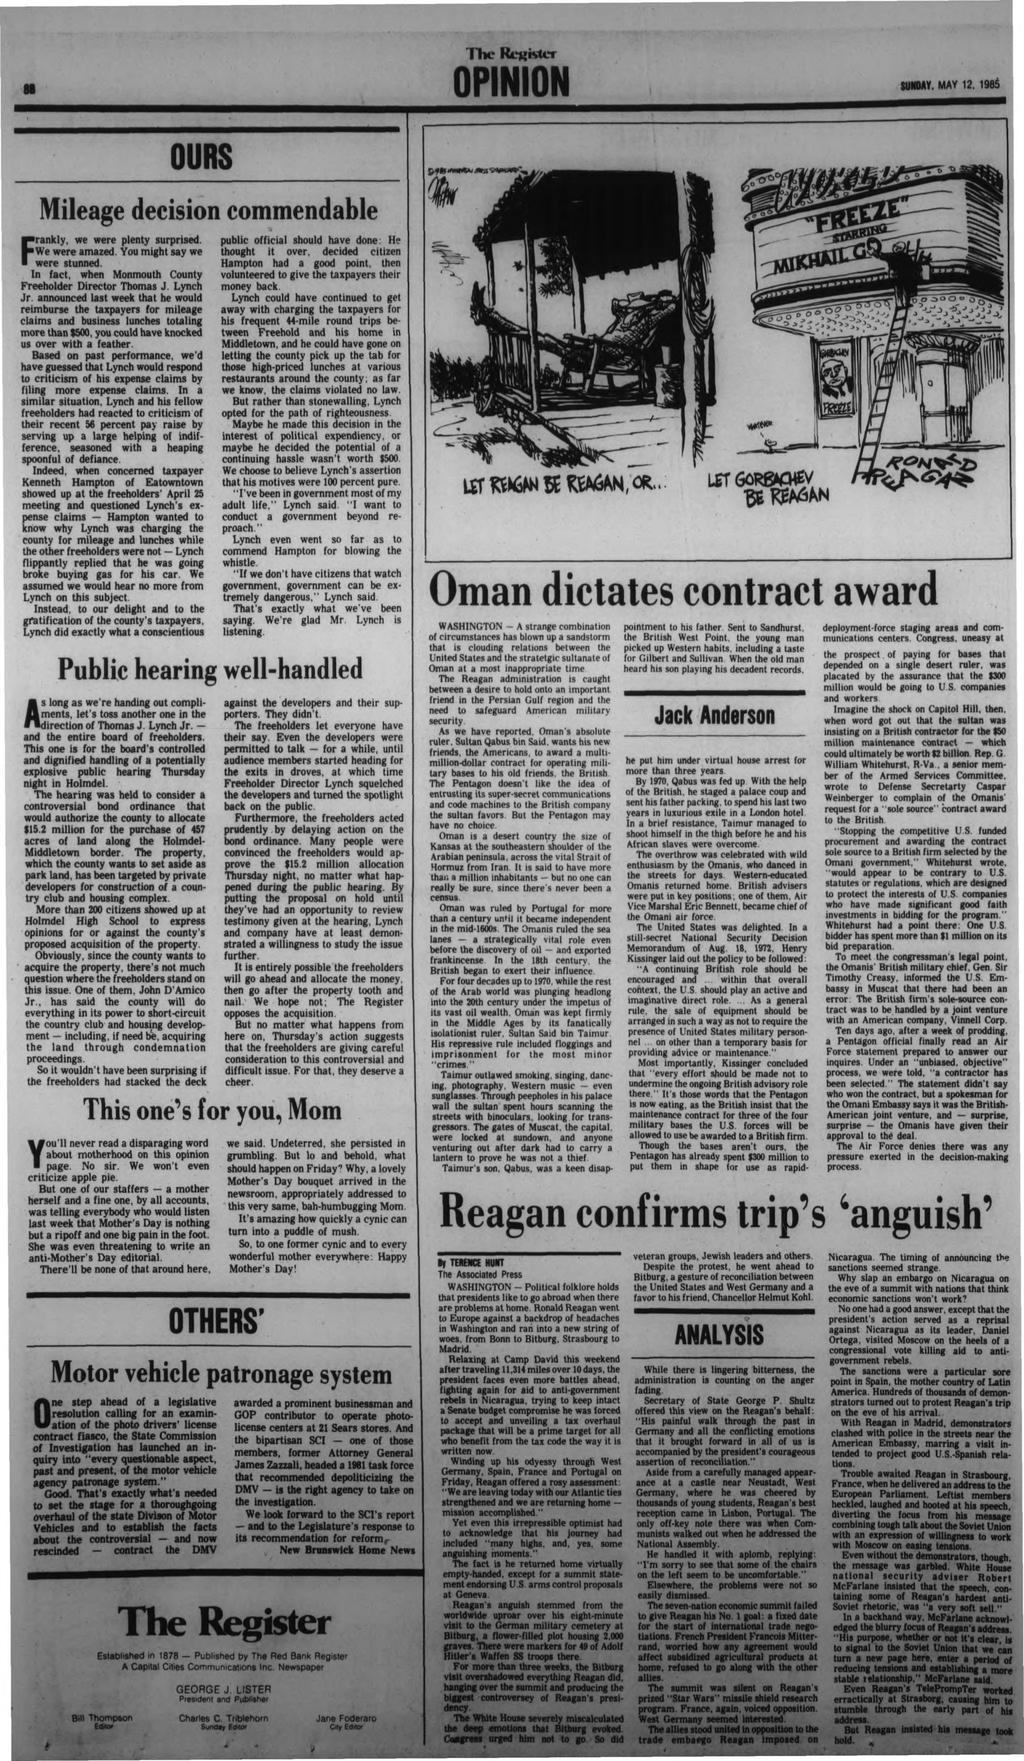 OPINION SUNDAY. MAY 12. 1985 F OURS Mileage decision commendable rankly, we were plenty surprised. We were amazed. You might say we were stunned.